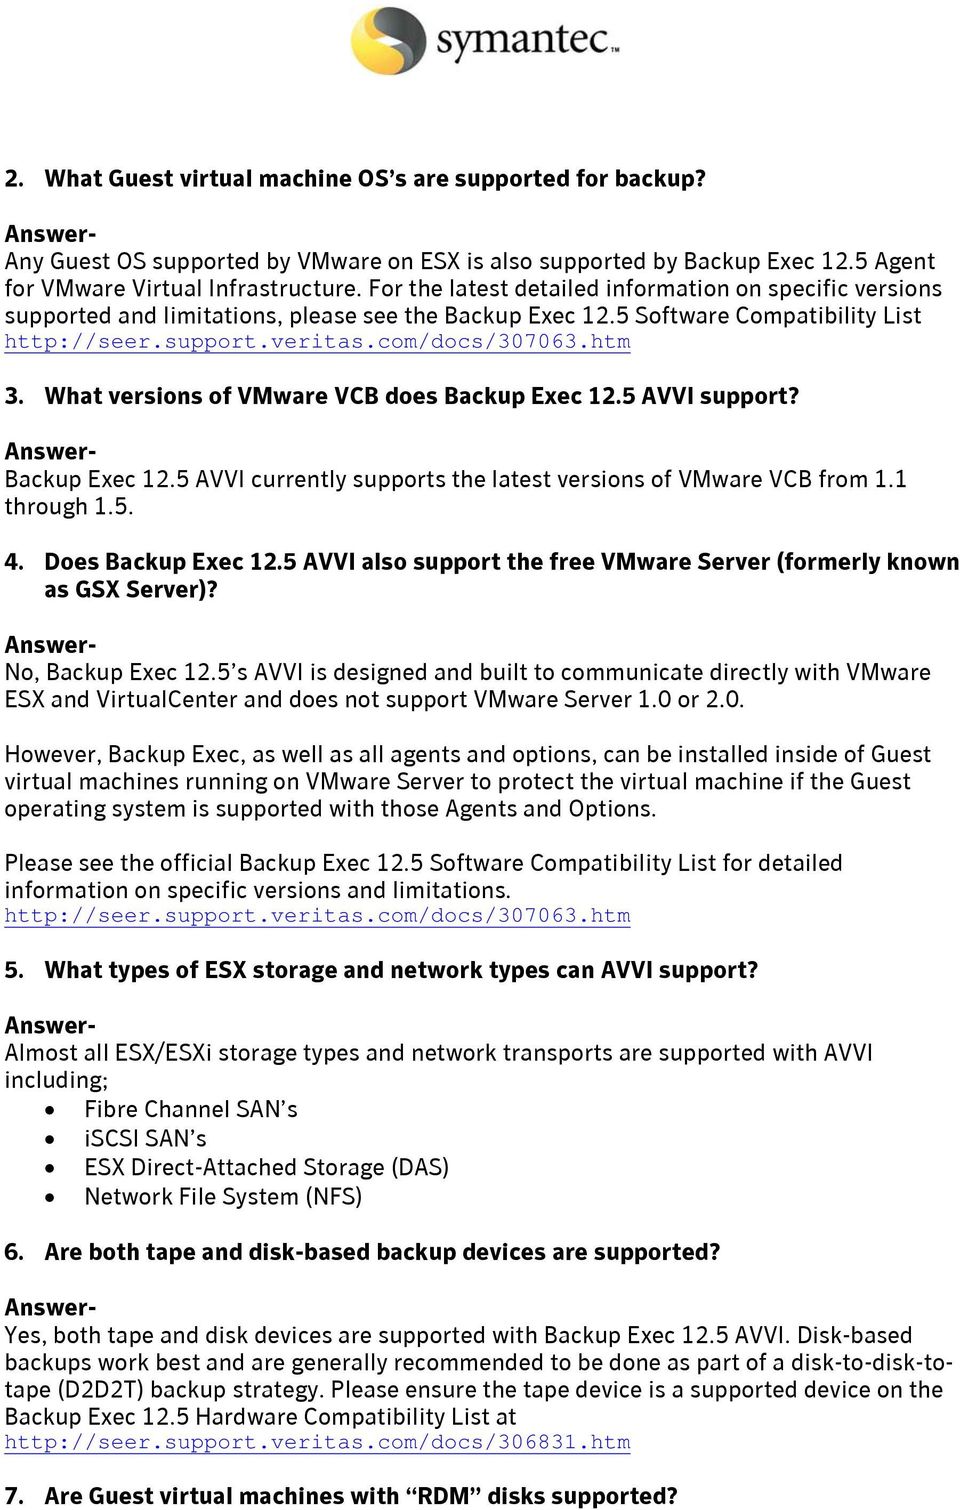 What versions of VMware VCB does Backup Exec 12.5 AVVI support? Backup Exec 12.5 AVVI currently supports the latest versions of VMware VCB from 1.1 through 1.5. 4. Does Backup Exec 12.